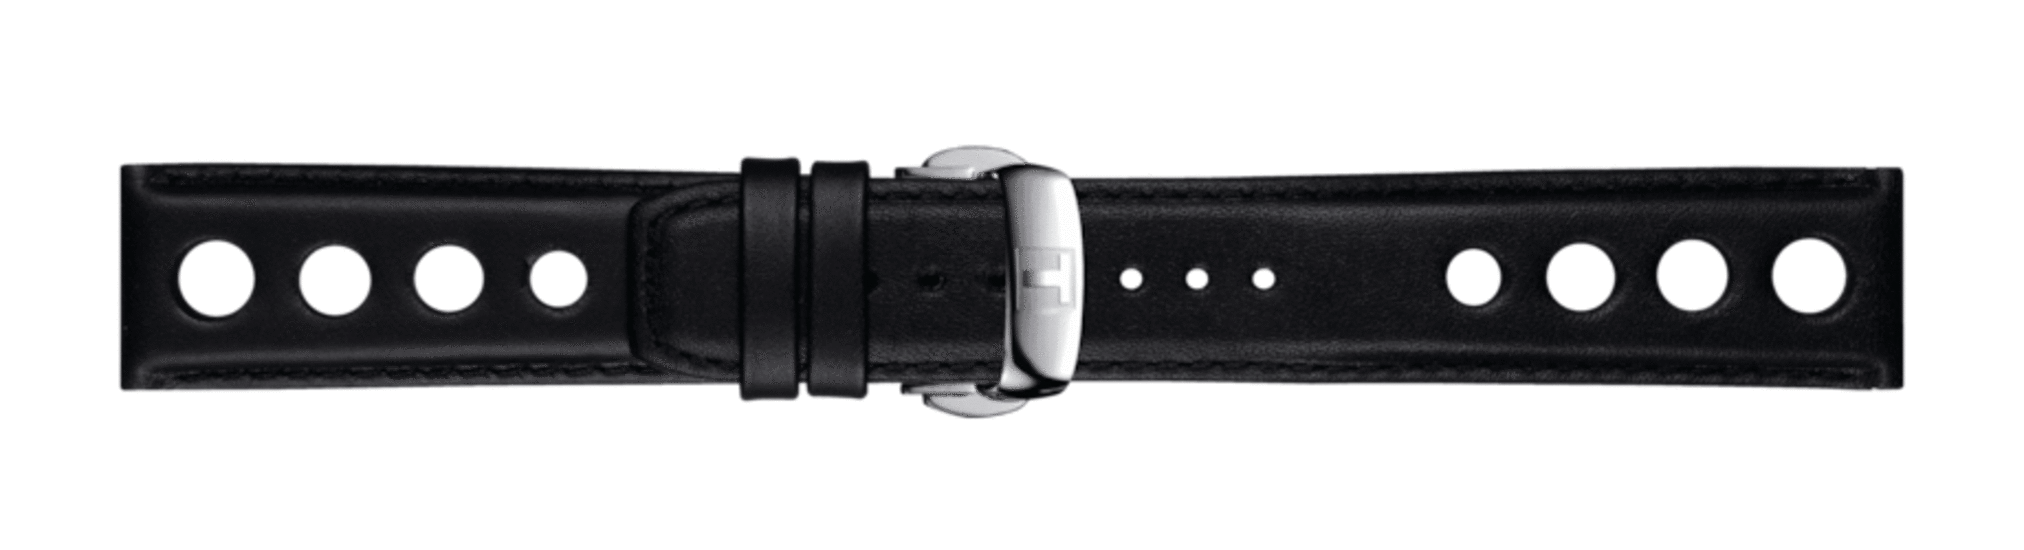 TISSOT OFFICIAL BLACK LEATHER STRAP LUGS 20 MM T852.037.163